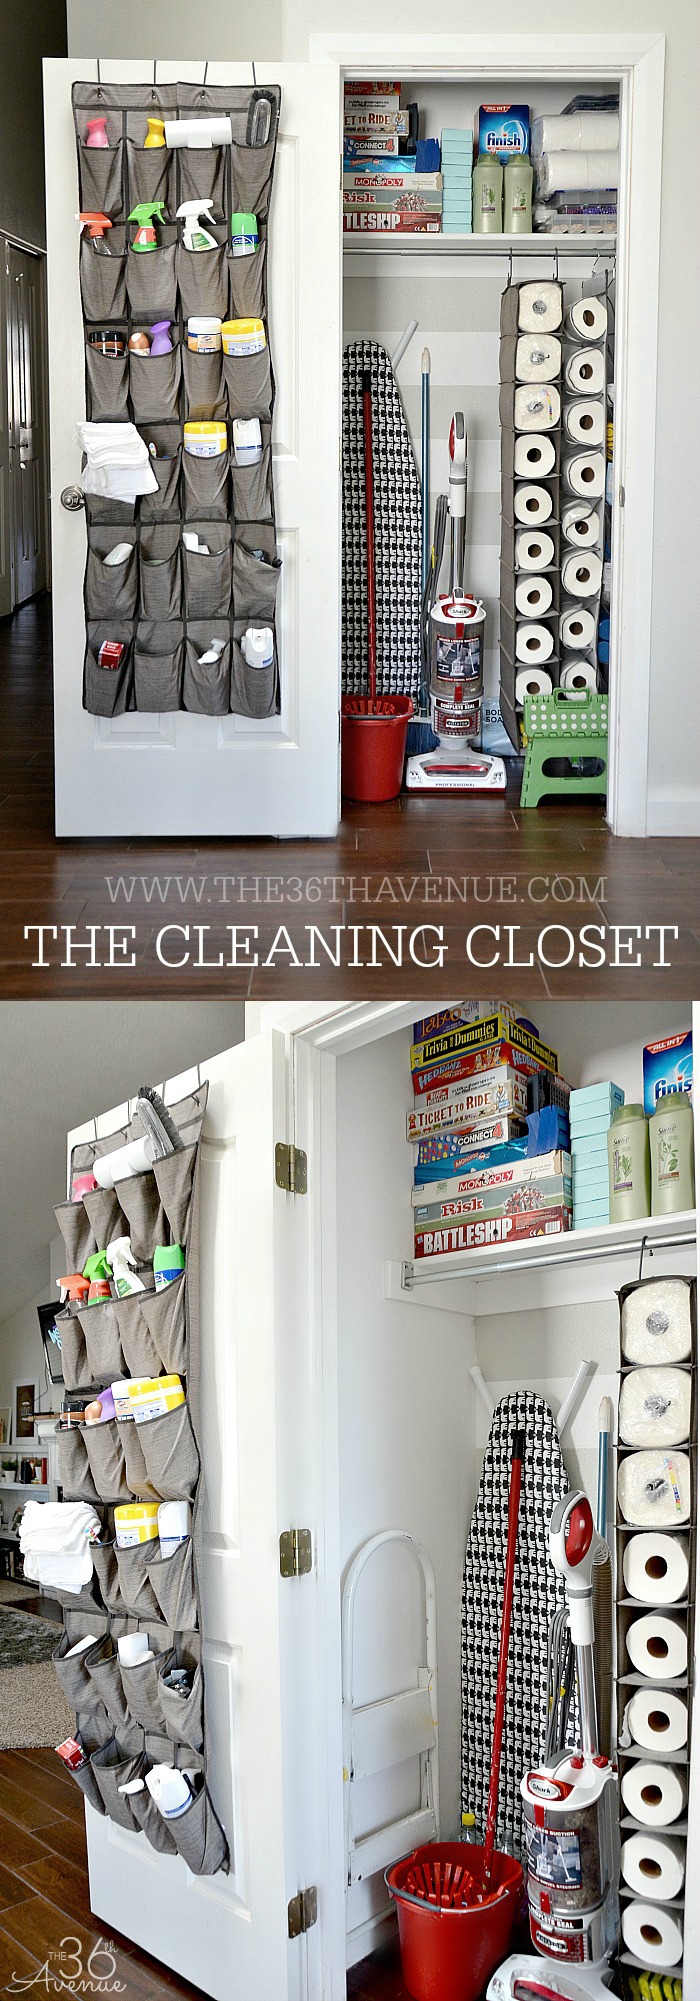 Cleaning-Tips-The-Cleaning-Closet-at-the36thavenue.com-